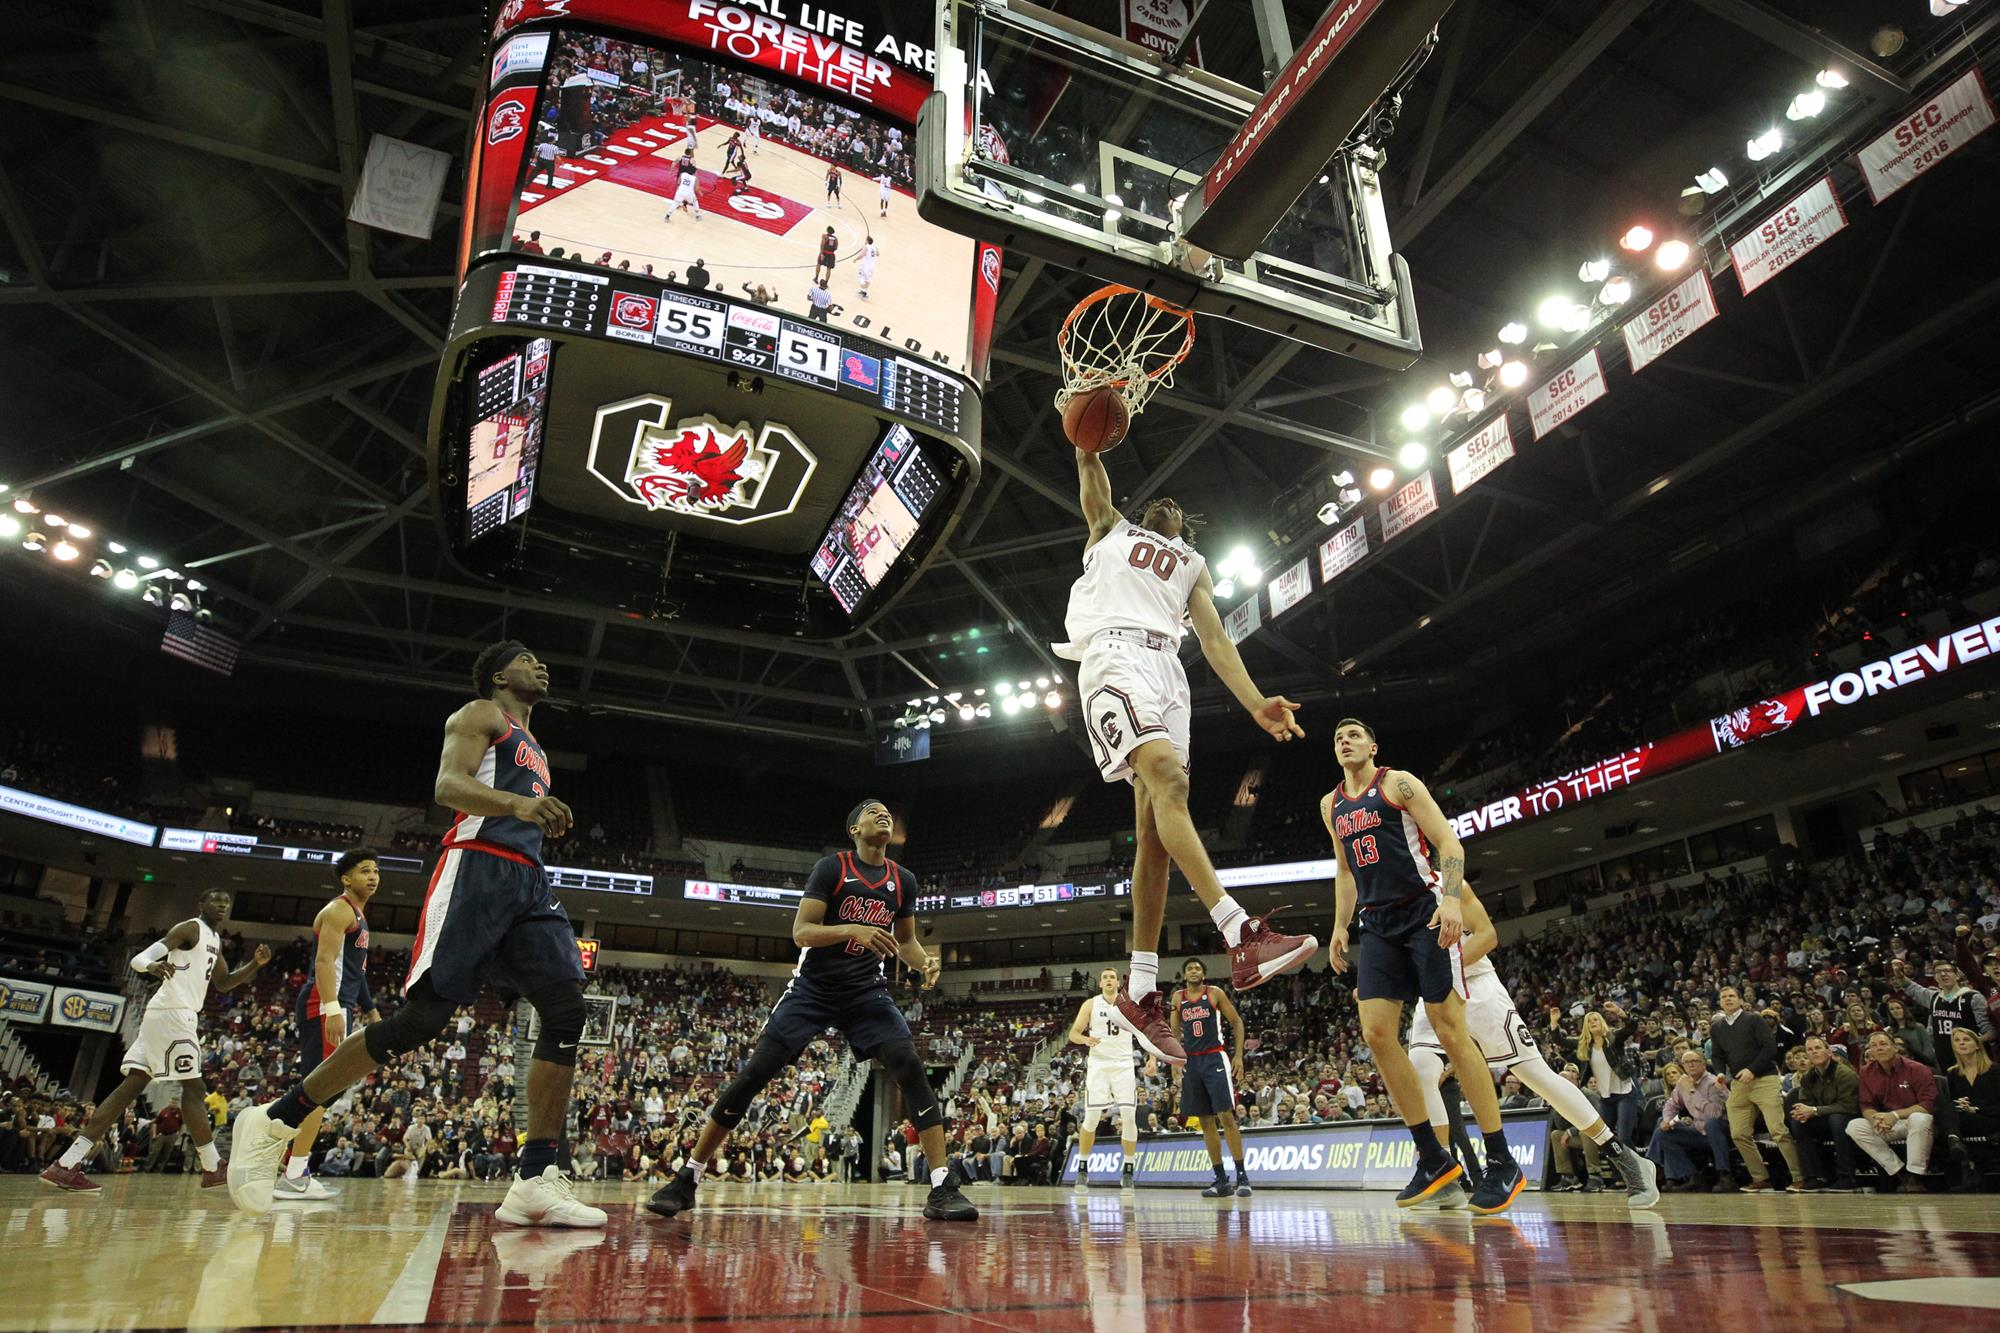 Late Defense Leads South Carolina to, 79-64, Win Over Ole Miss